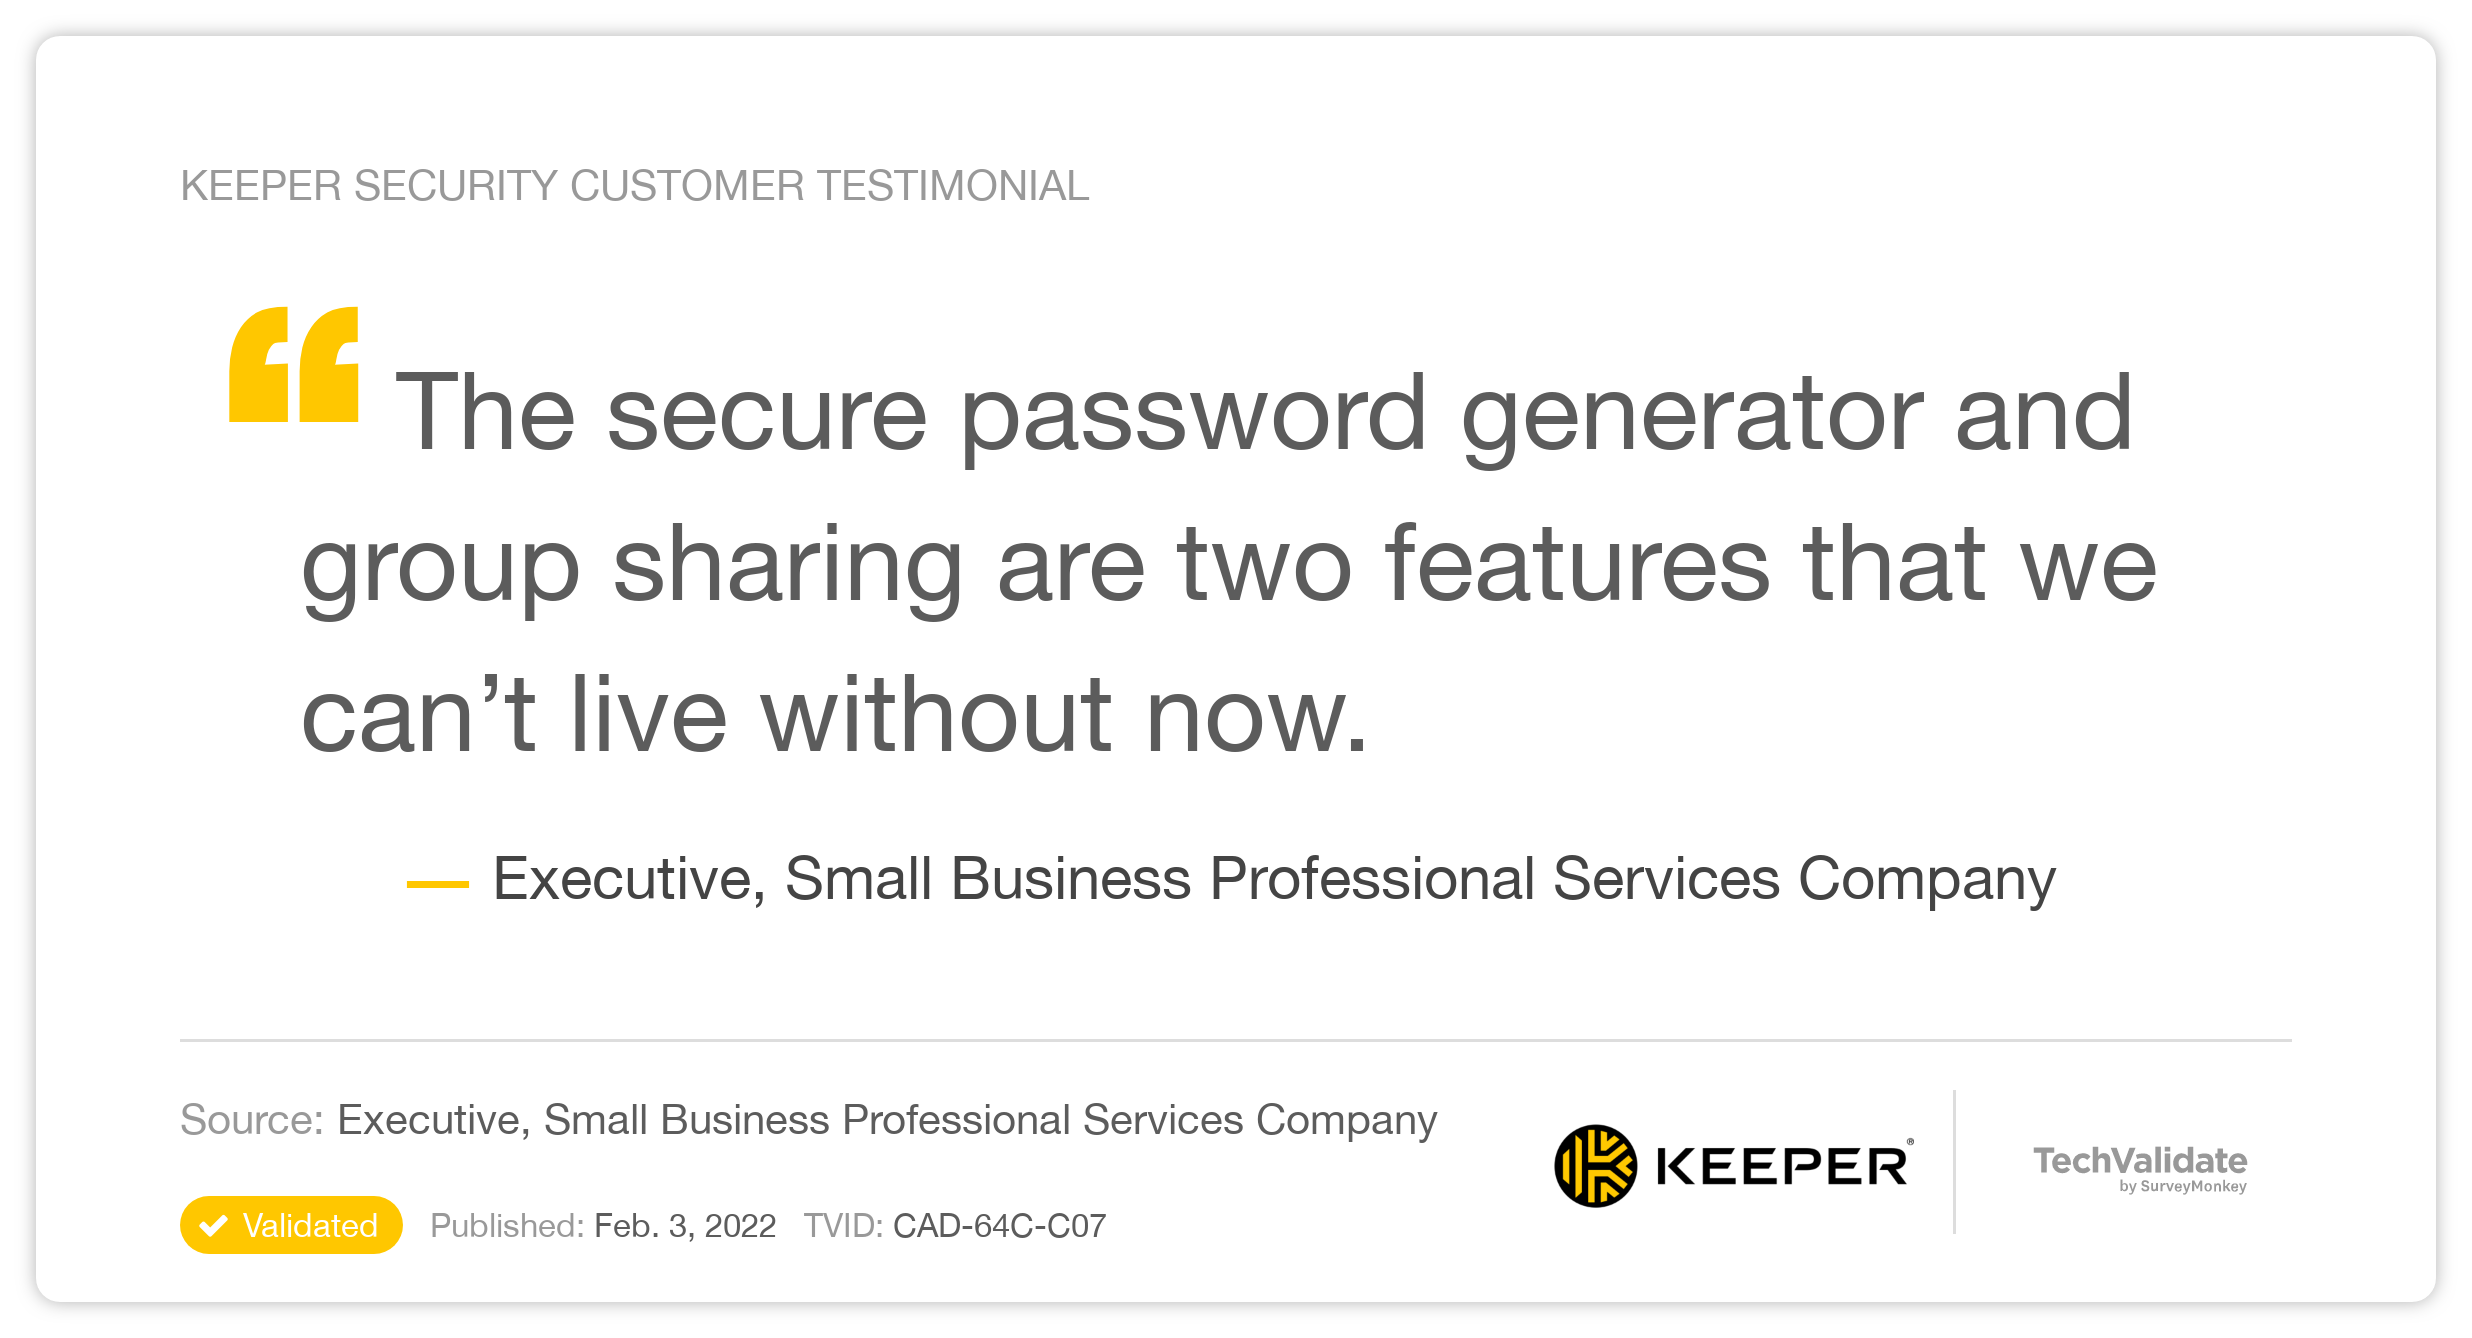 The secure password generator and group sharing are two features that we can’t live without now.